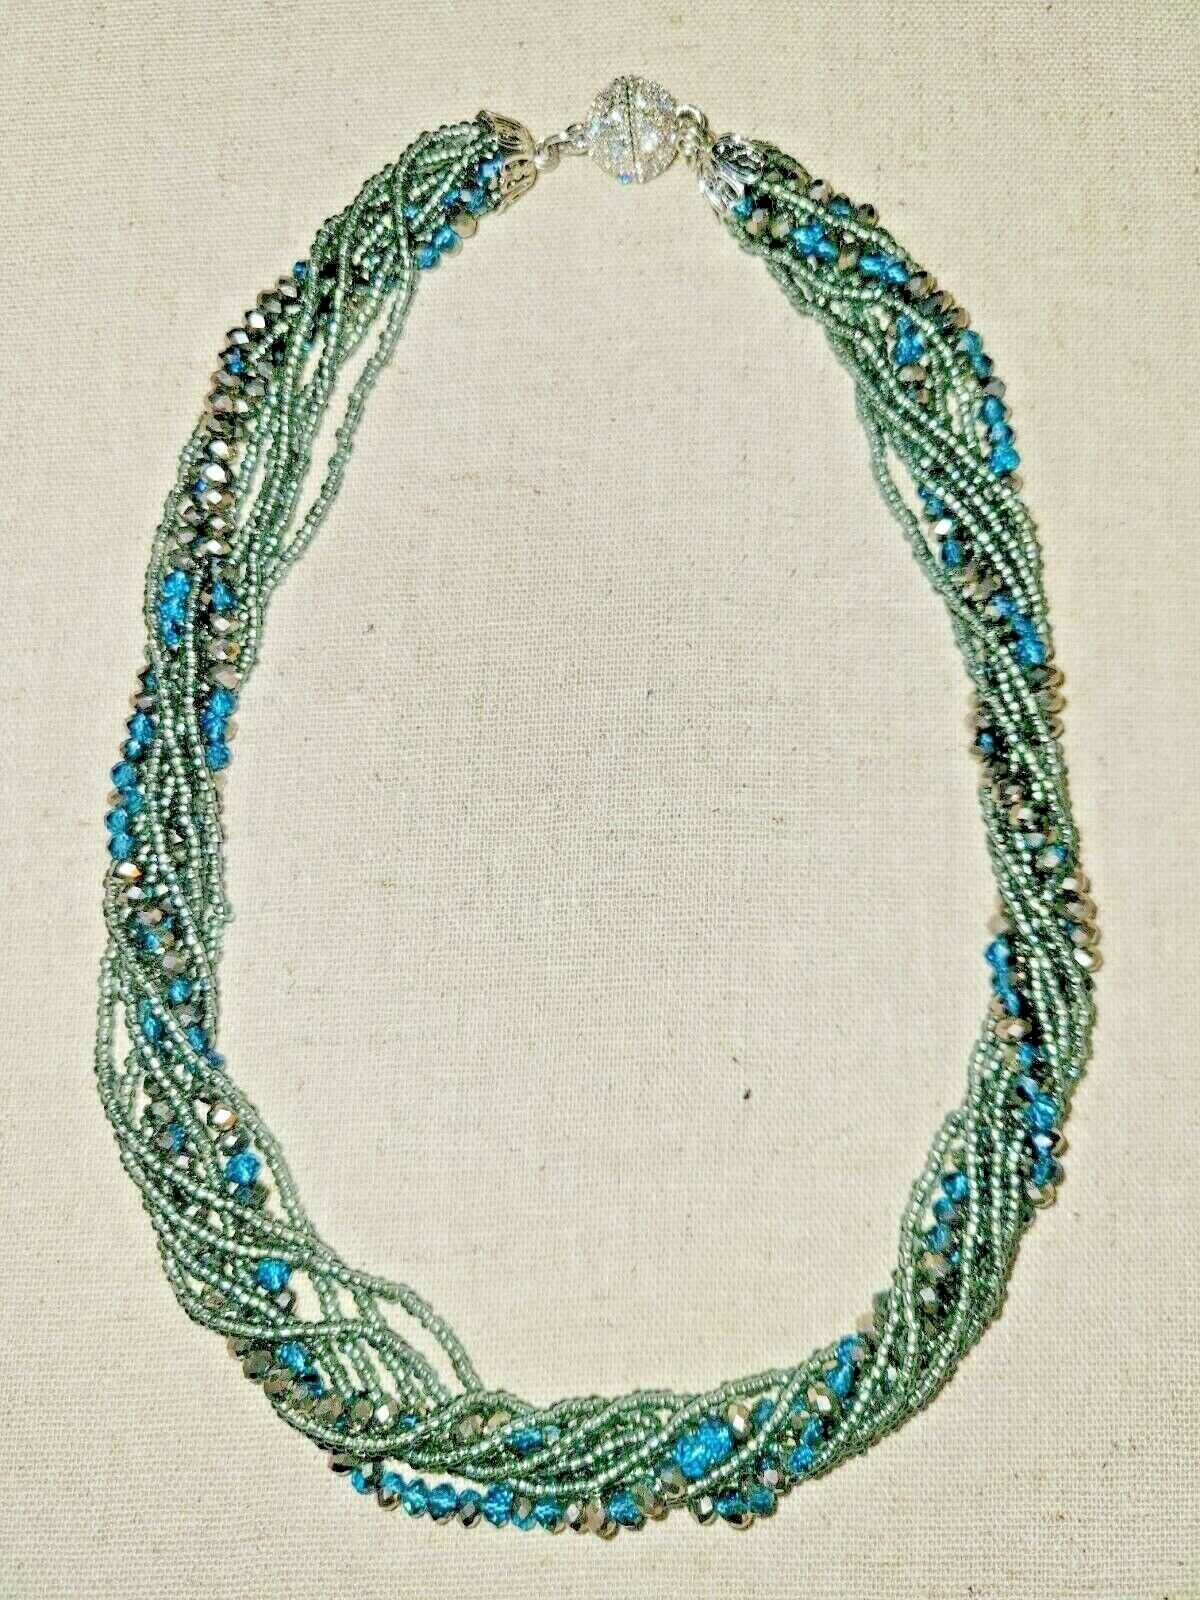 PREMIER DESIGNS Blues Greens Crystal Multi-strand Faceted Beaded Necklace 16" - $9.70